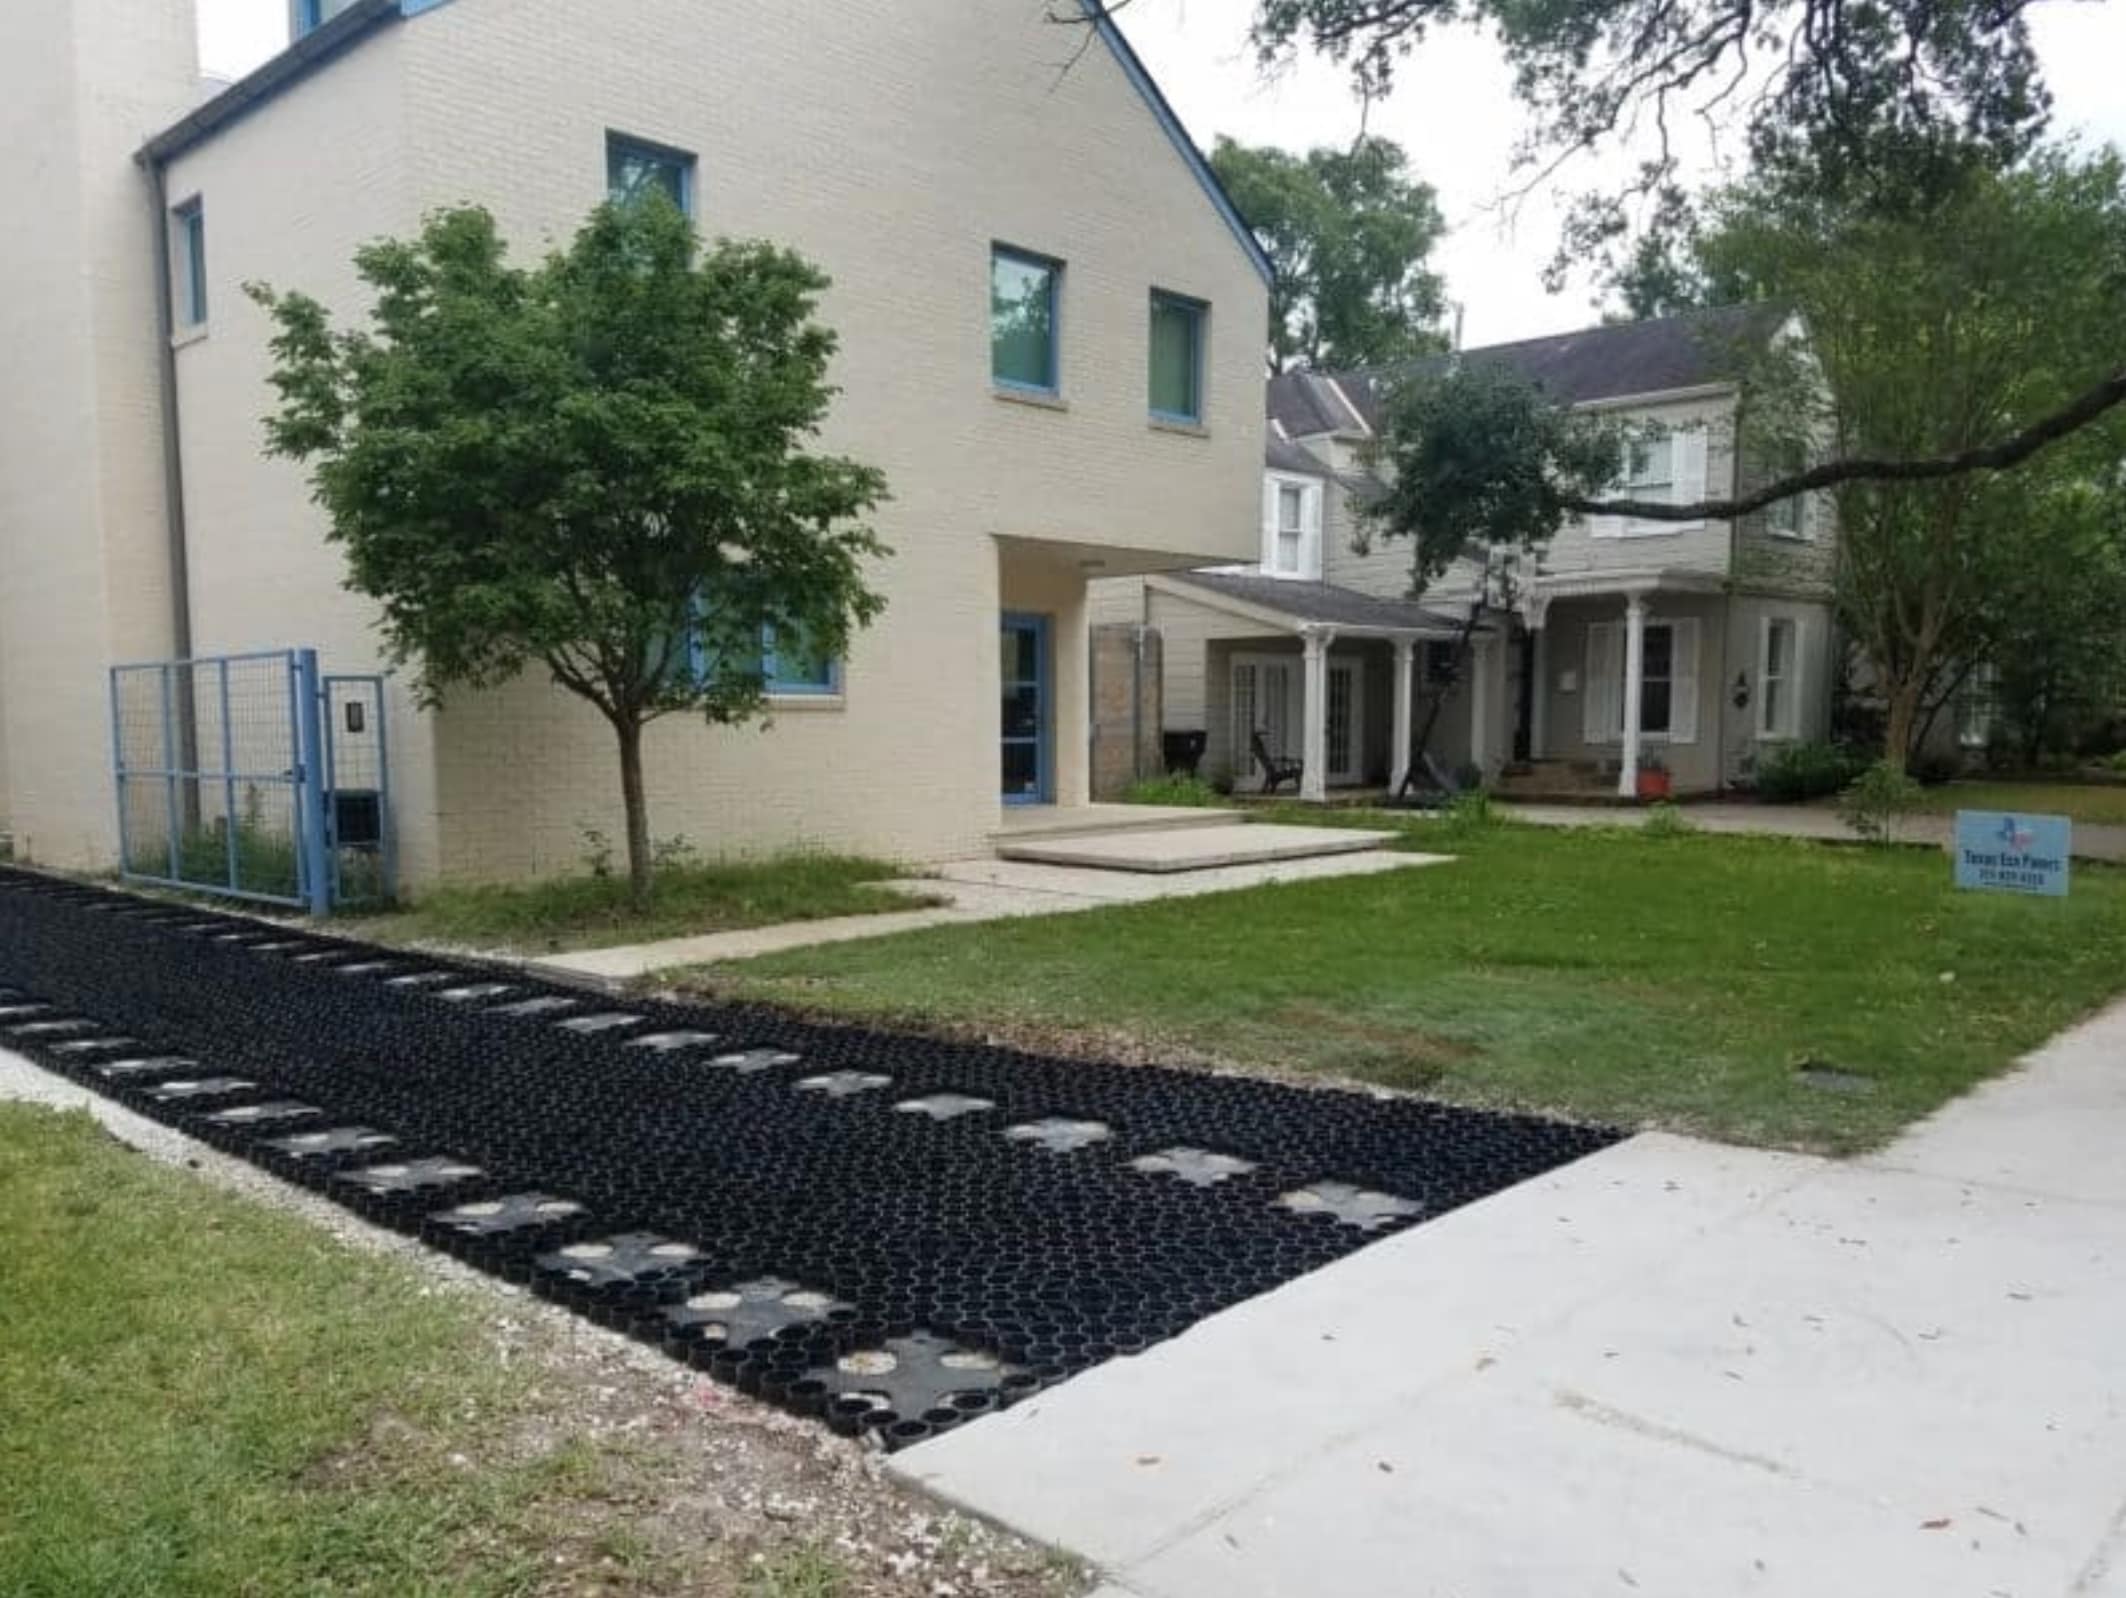 Optimizing Your Ribbon Driveway for the Best Performance